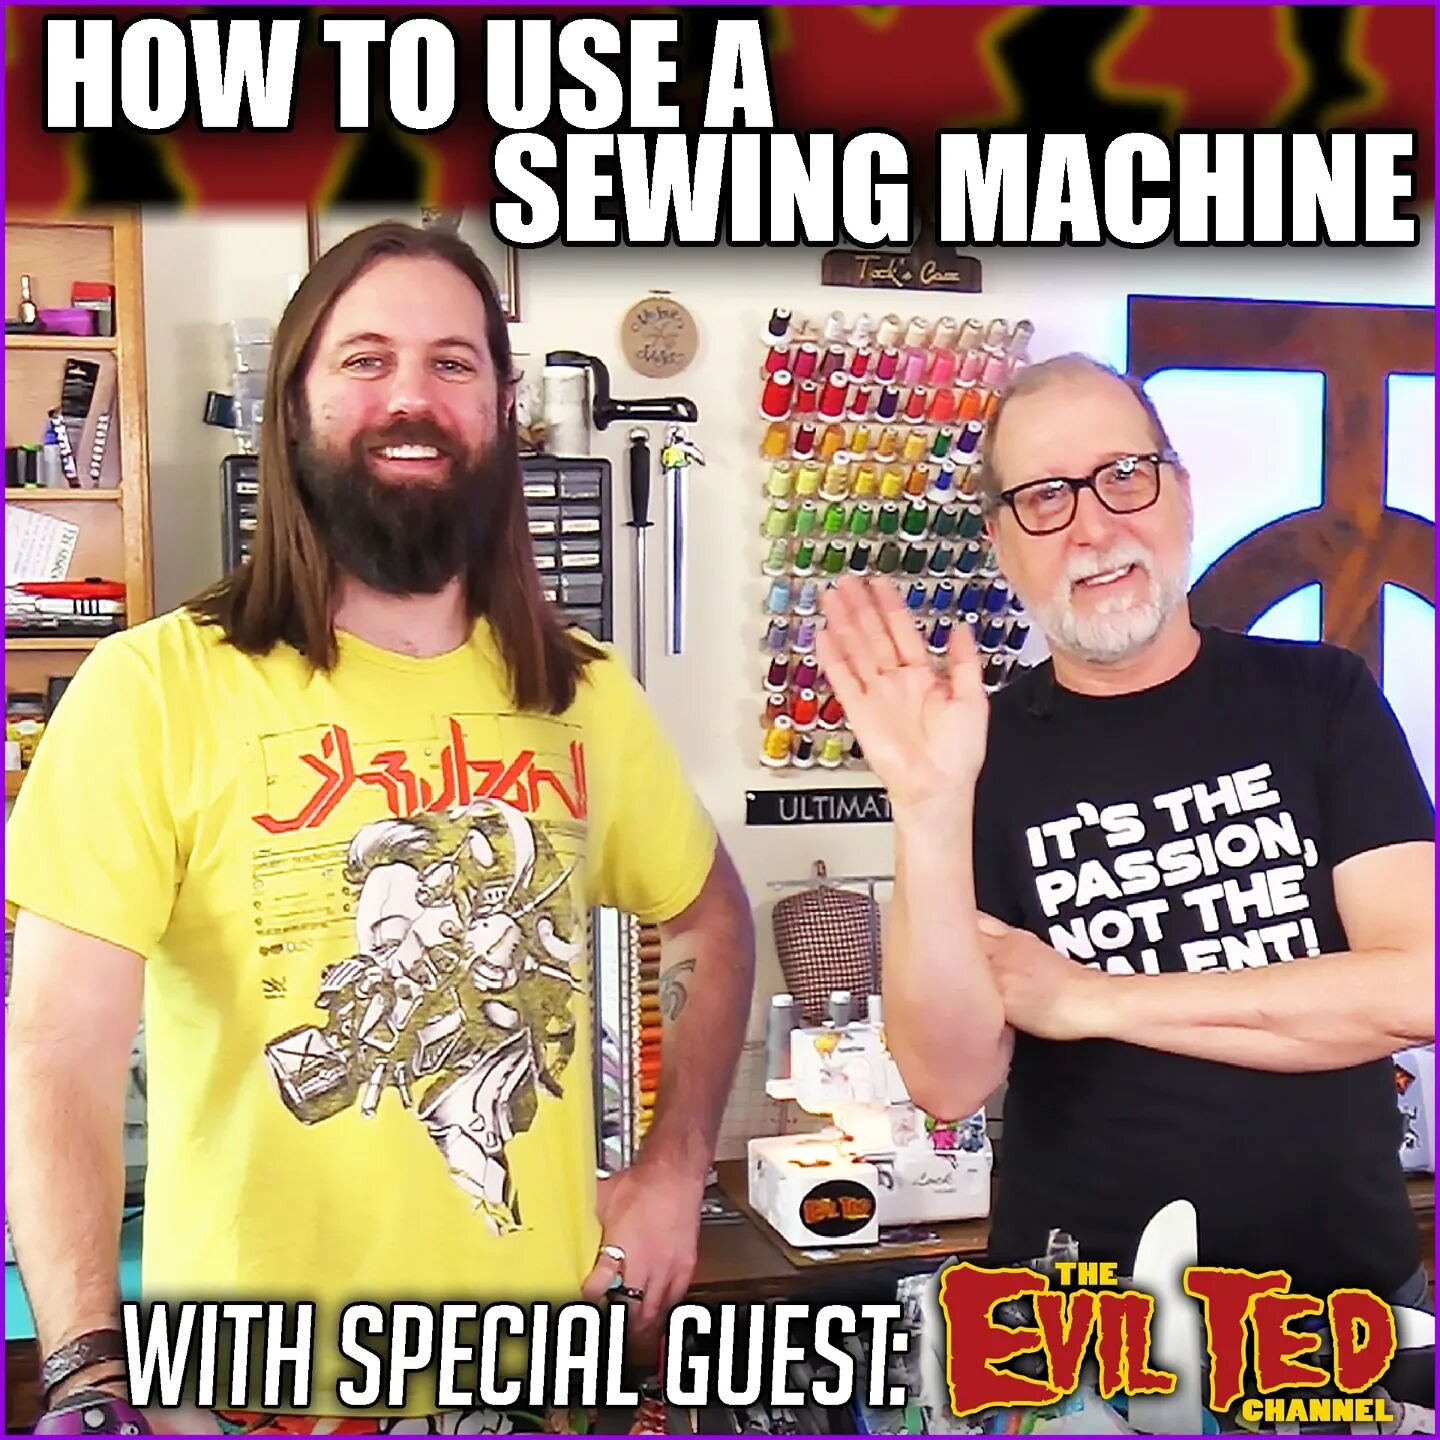 New &quot;Beginner's Sewing Tutorial&quot; up with @evilted_channel - This was the first shoot we did together, which is very special to me since Ted inspired me to make my first cosplay. Also Ted had never used a sewing machine so it was really funn